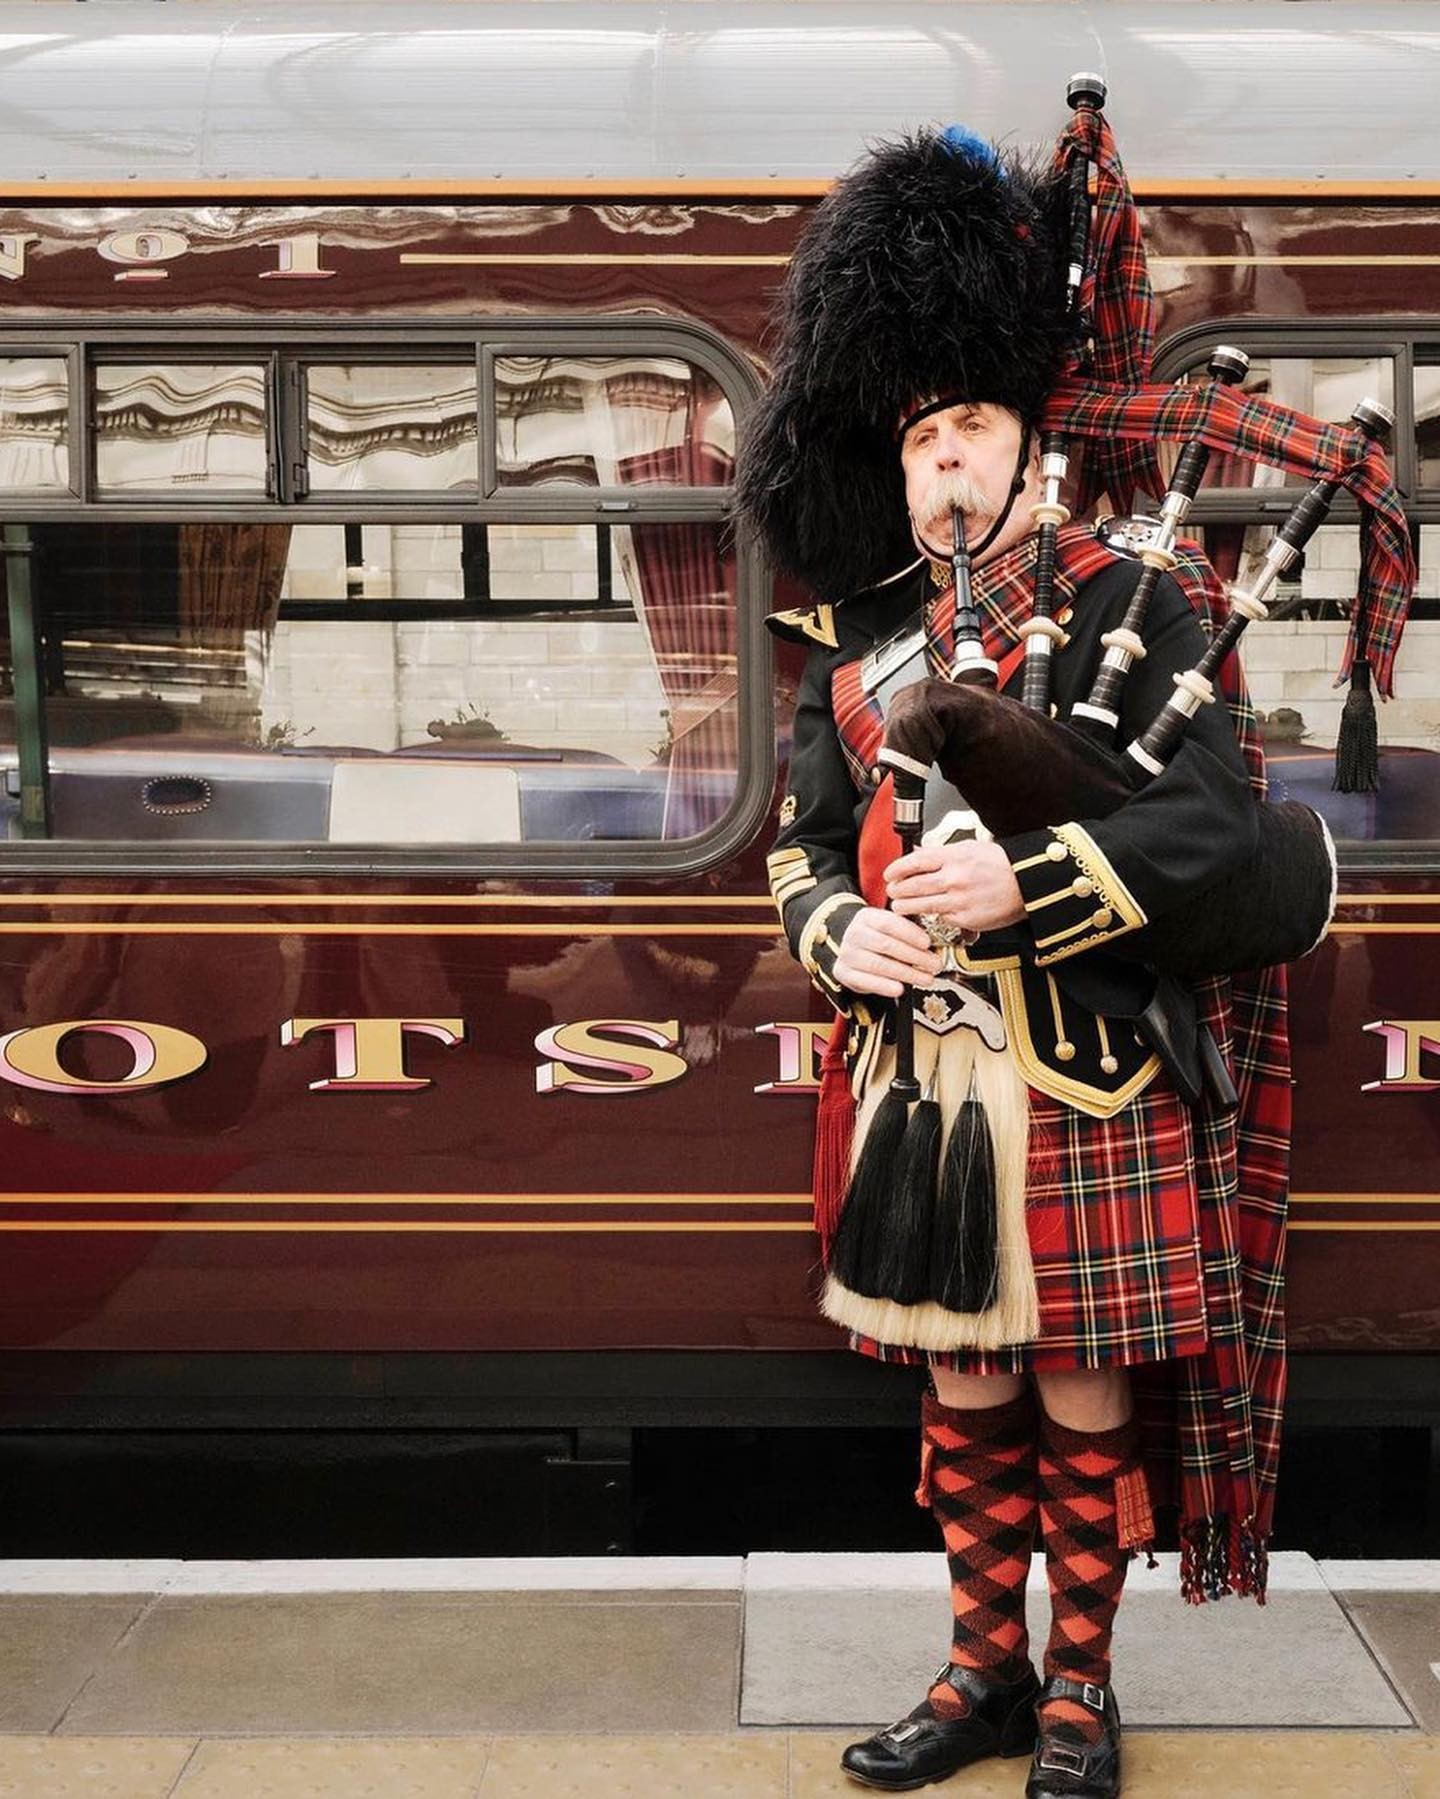 What is the Royal Scotsman?